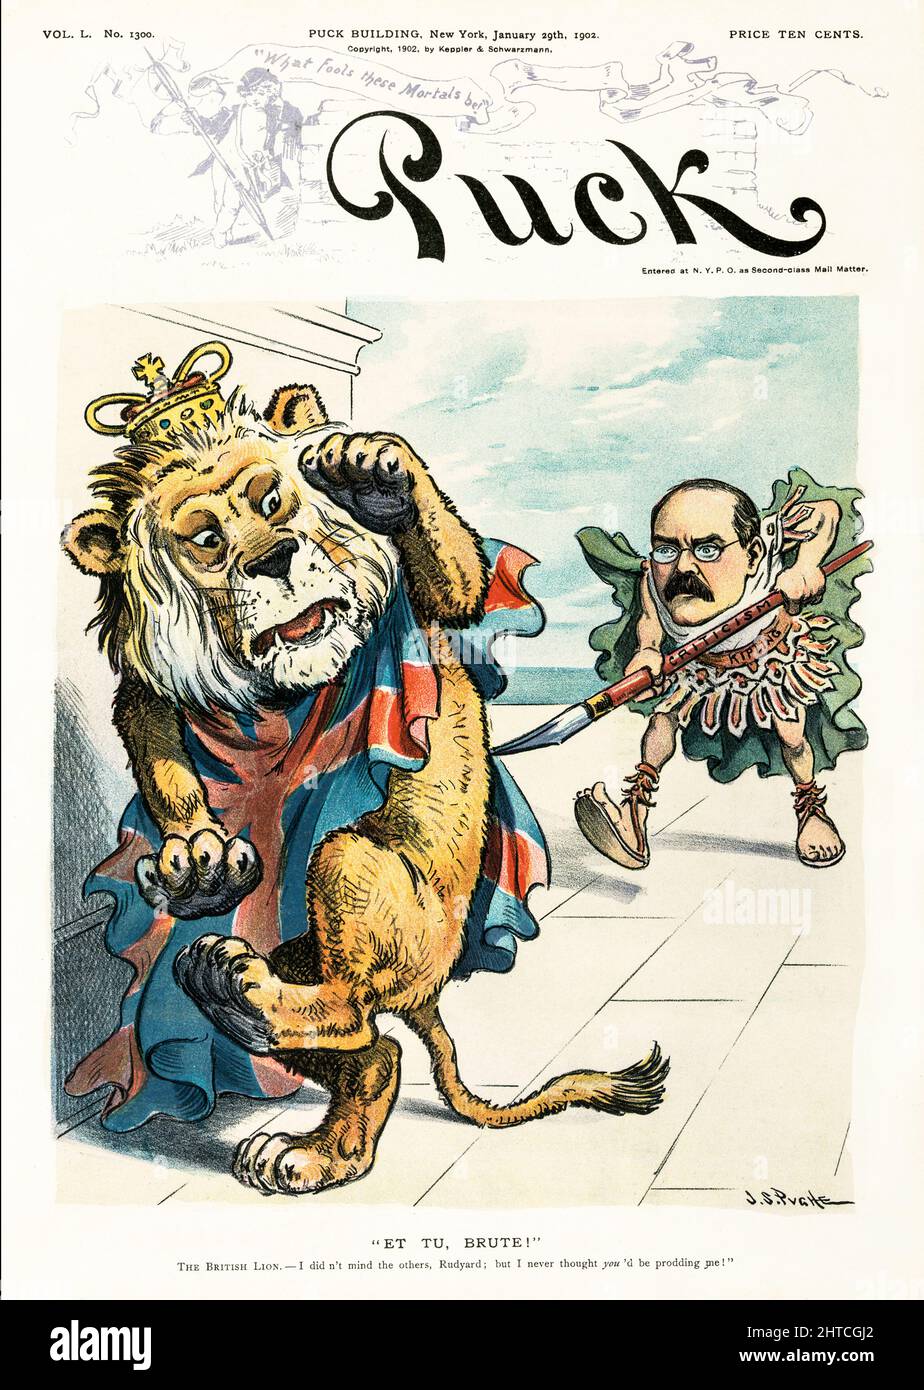 An early 20th century American Puck Magazine illustration of Rudyard Kipling holding a pen labelled 'Criticism' which he is using as a prod to get the British Lion moving in a particular direction. In a 1902 poem, The Rowers, Kipling attacked the Kaiser as a threat to Britain and called for an Anglo-French alliance to stop Germany. Stock Photo